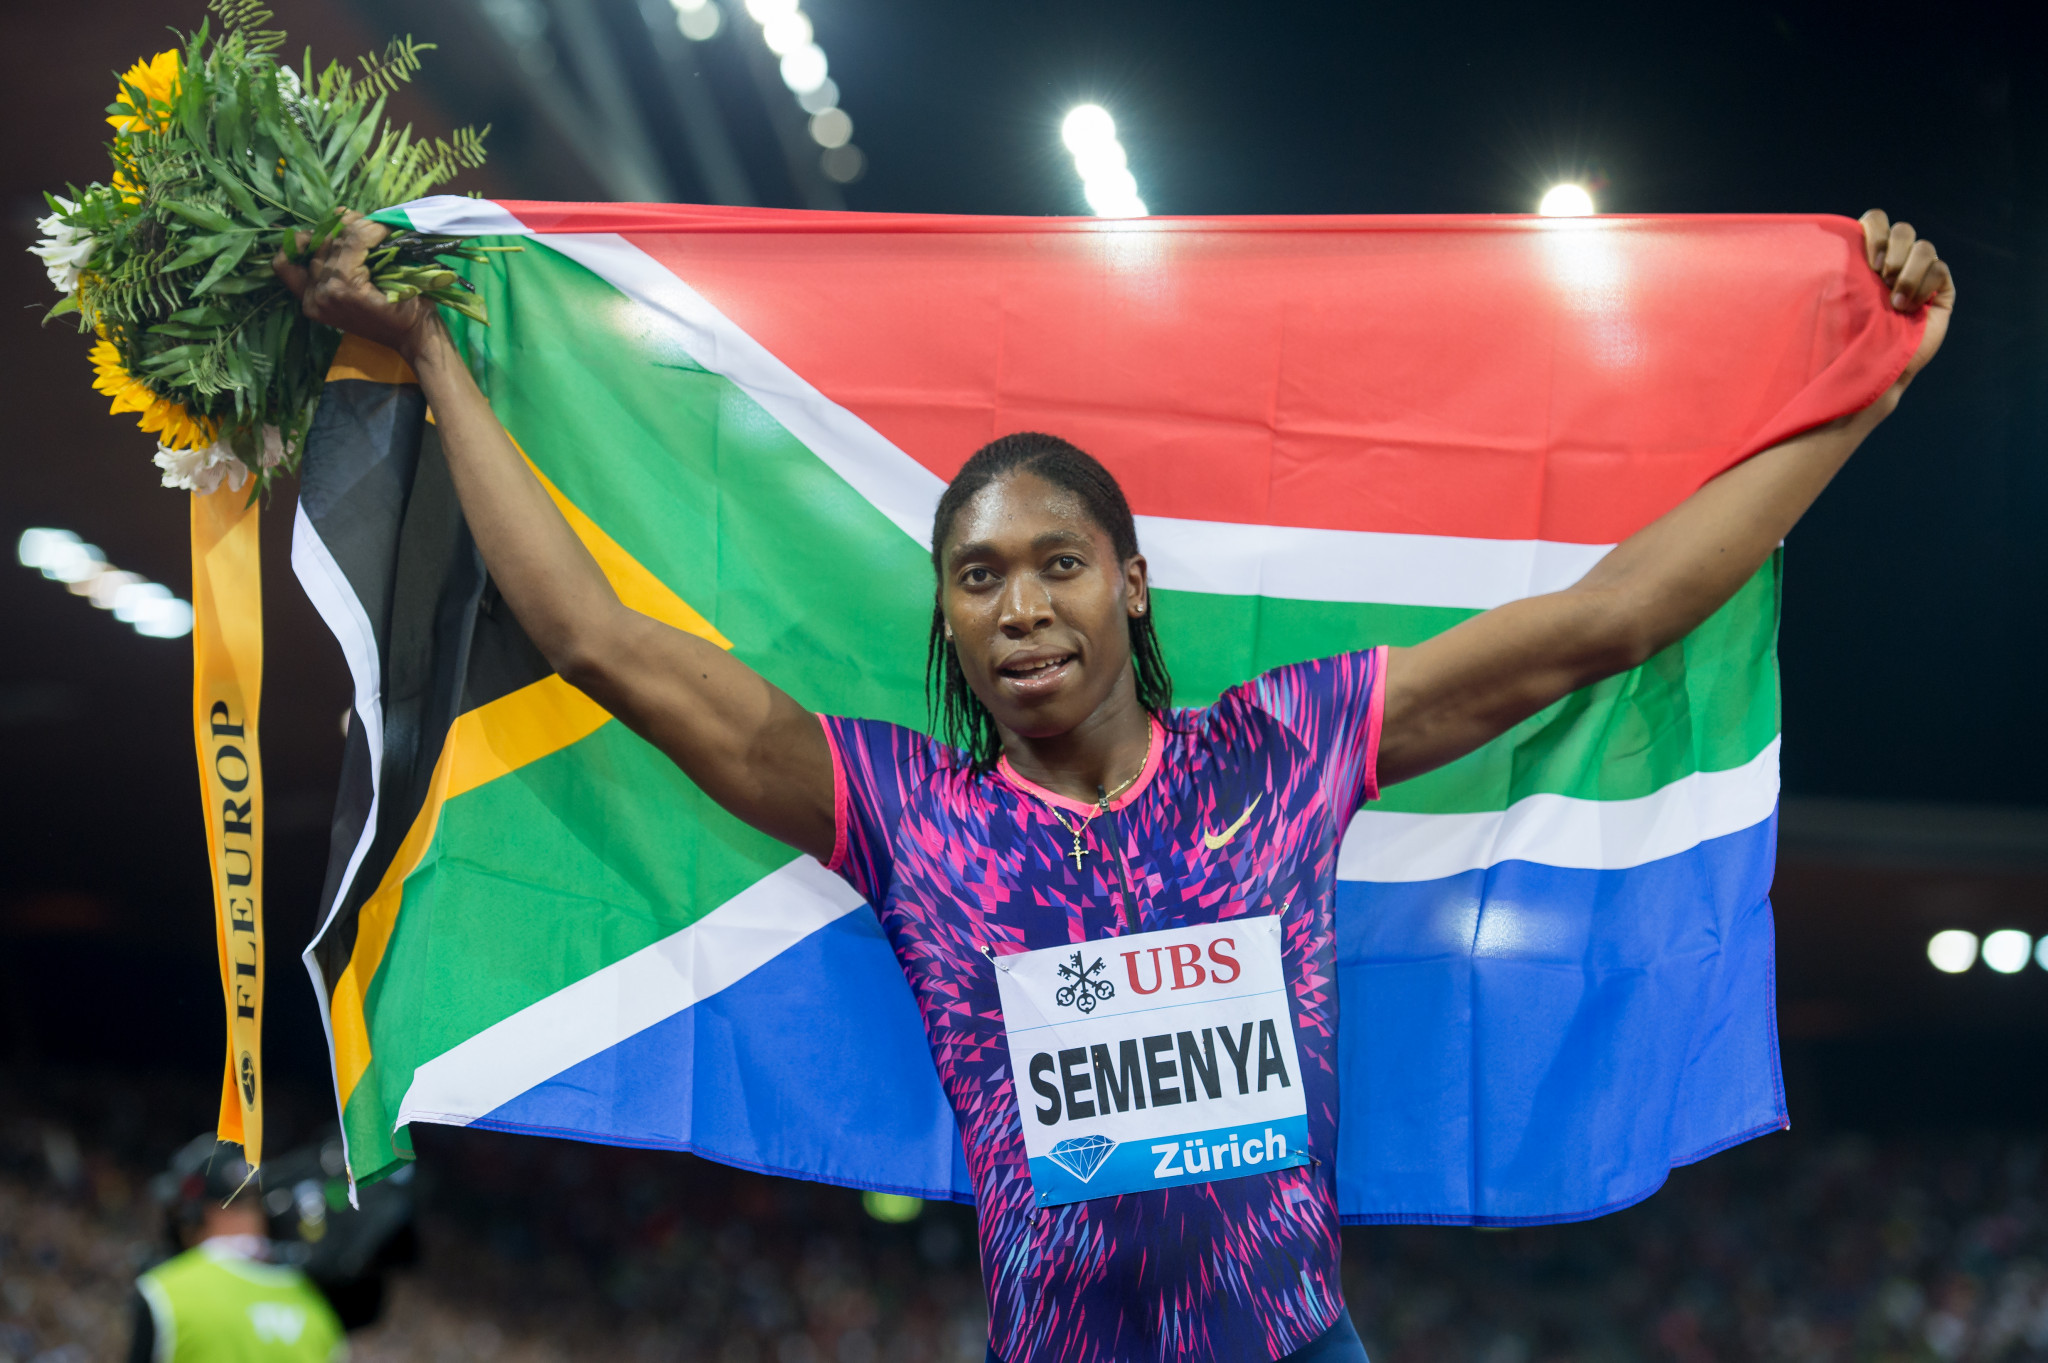 South Africa's world and Olympic 800m champion Caster Semenya has been a key figure in the IAAF's formulation of hyperandrogenism regulations ©Getty Images